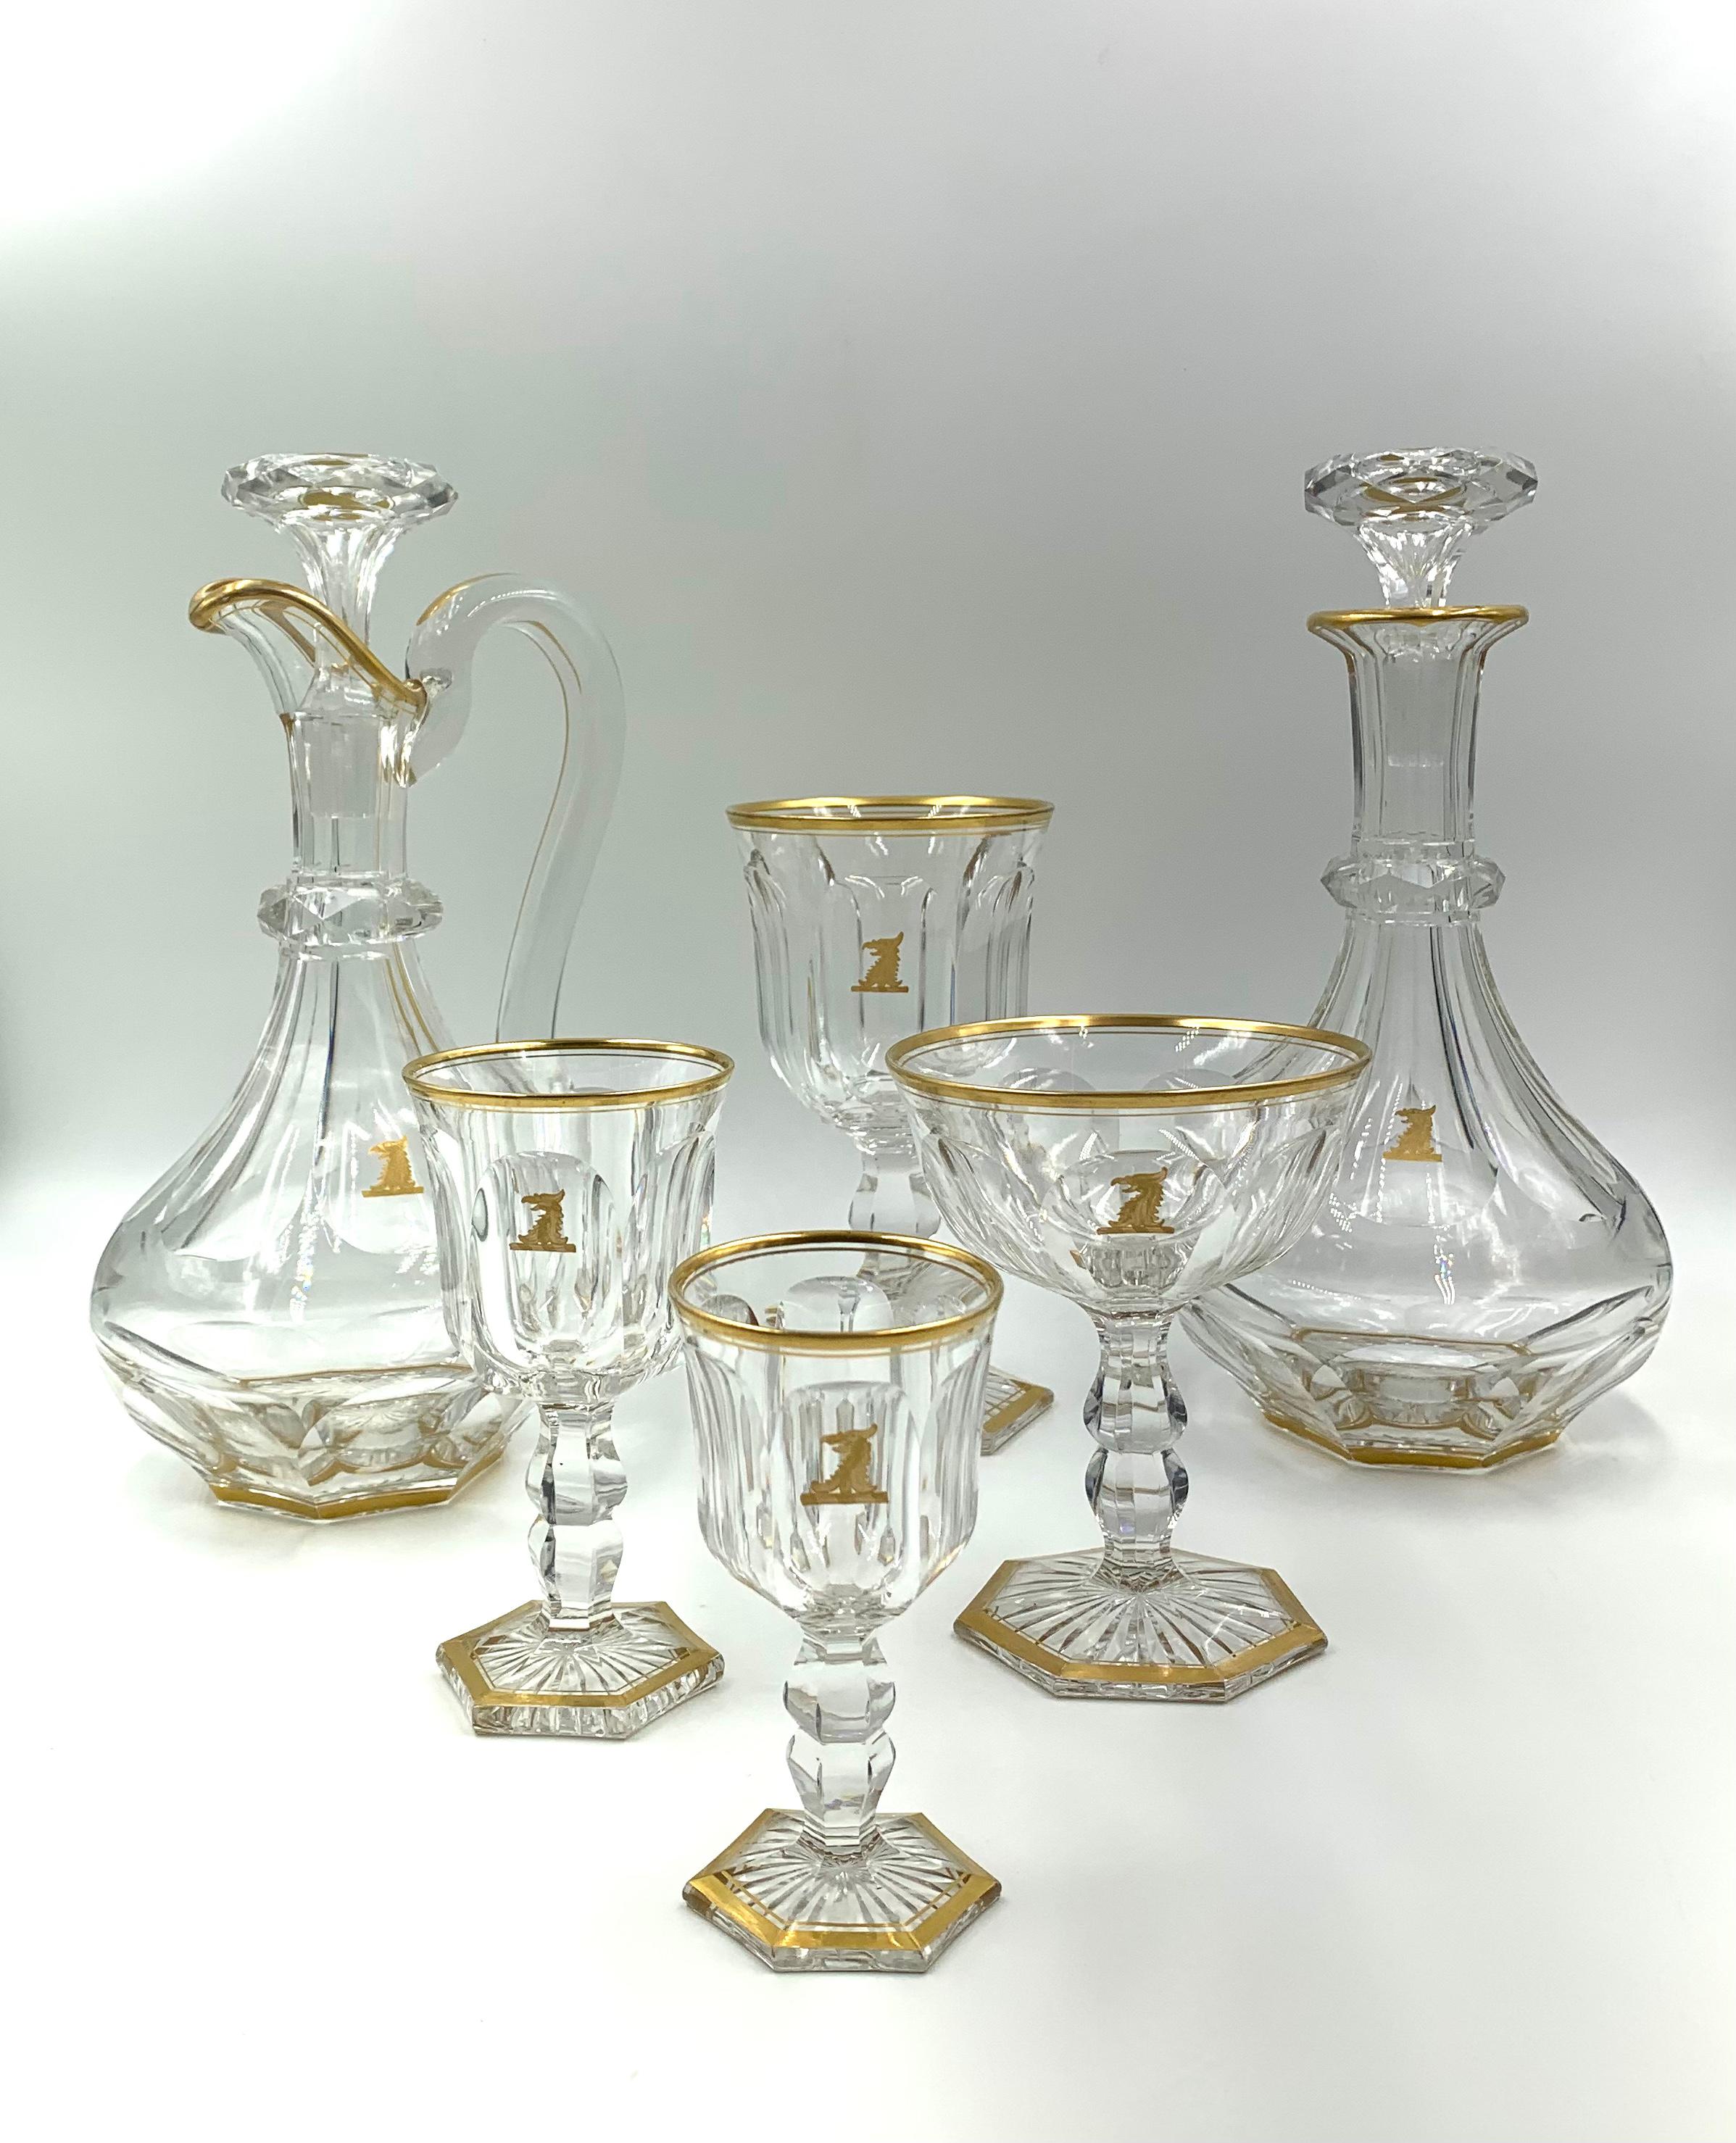 Antique Baccarat Crystal Empire Armorial Crest 34 Piece Stemware Service for 8 For Sale 2